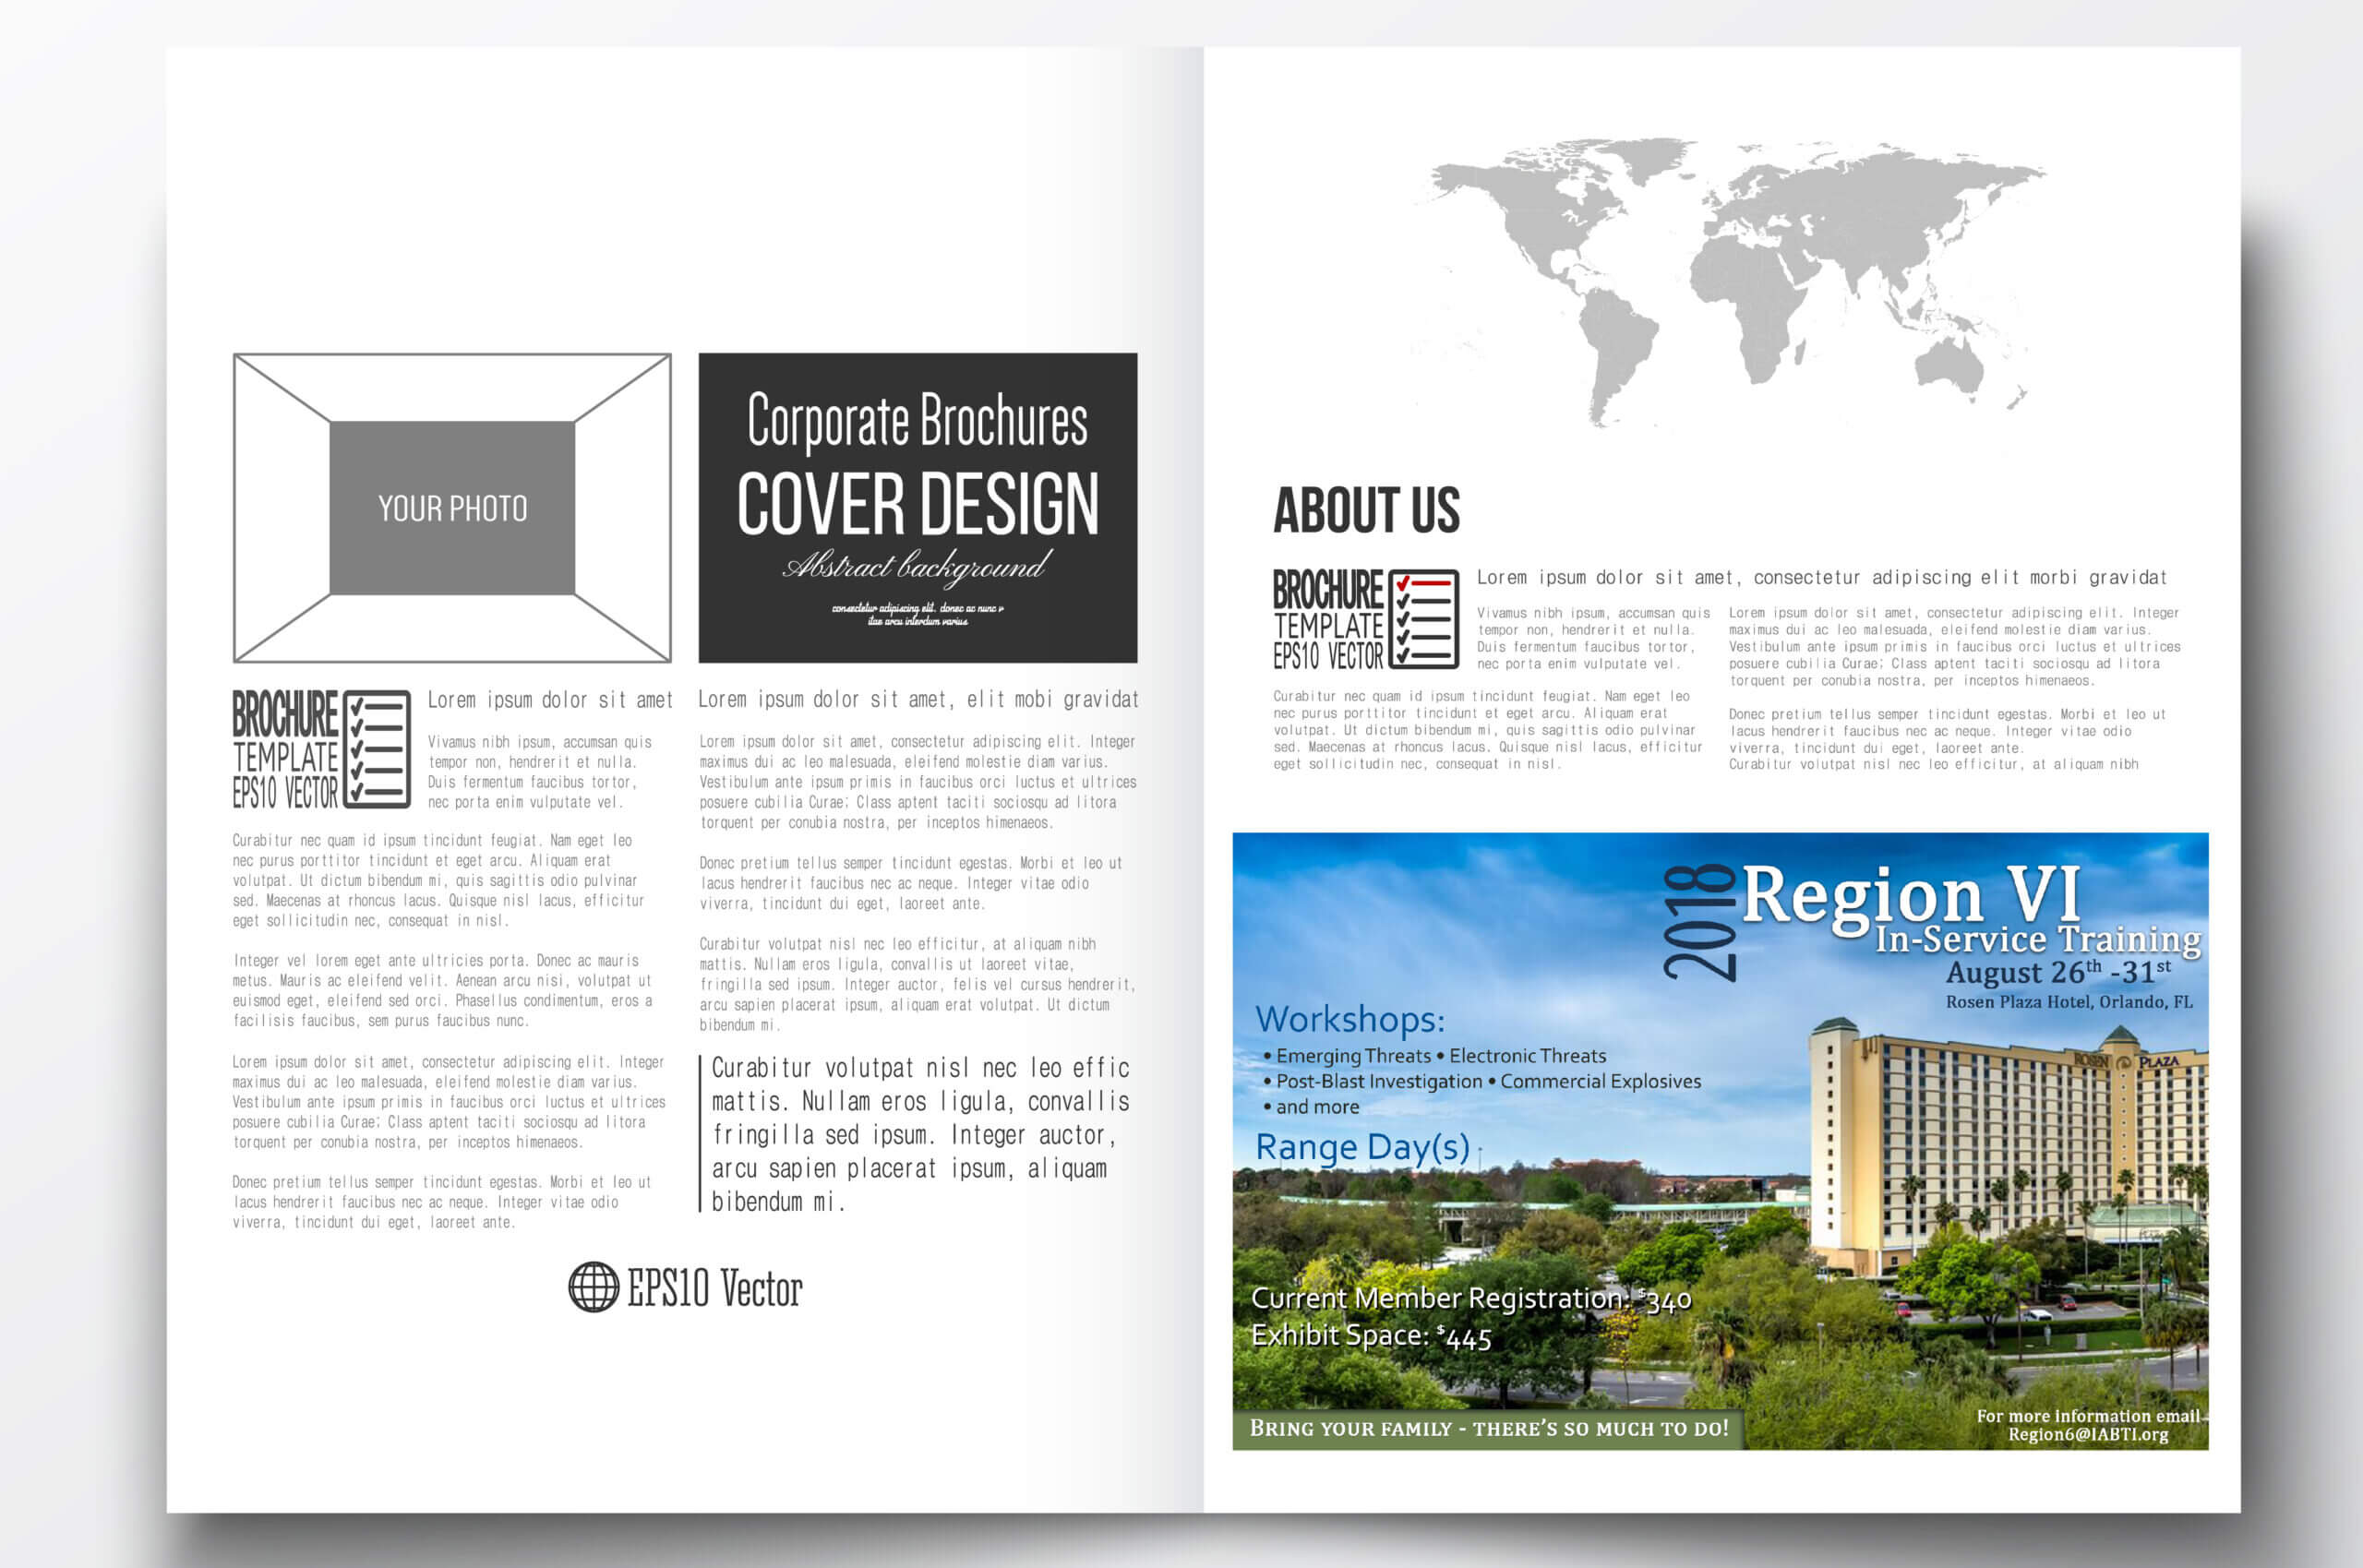 027 Half Page Template Ideas Regioni6Ad Stupendous Ad Free With Magazine Ad Template Word